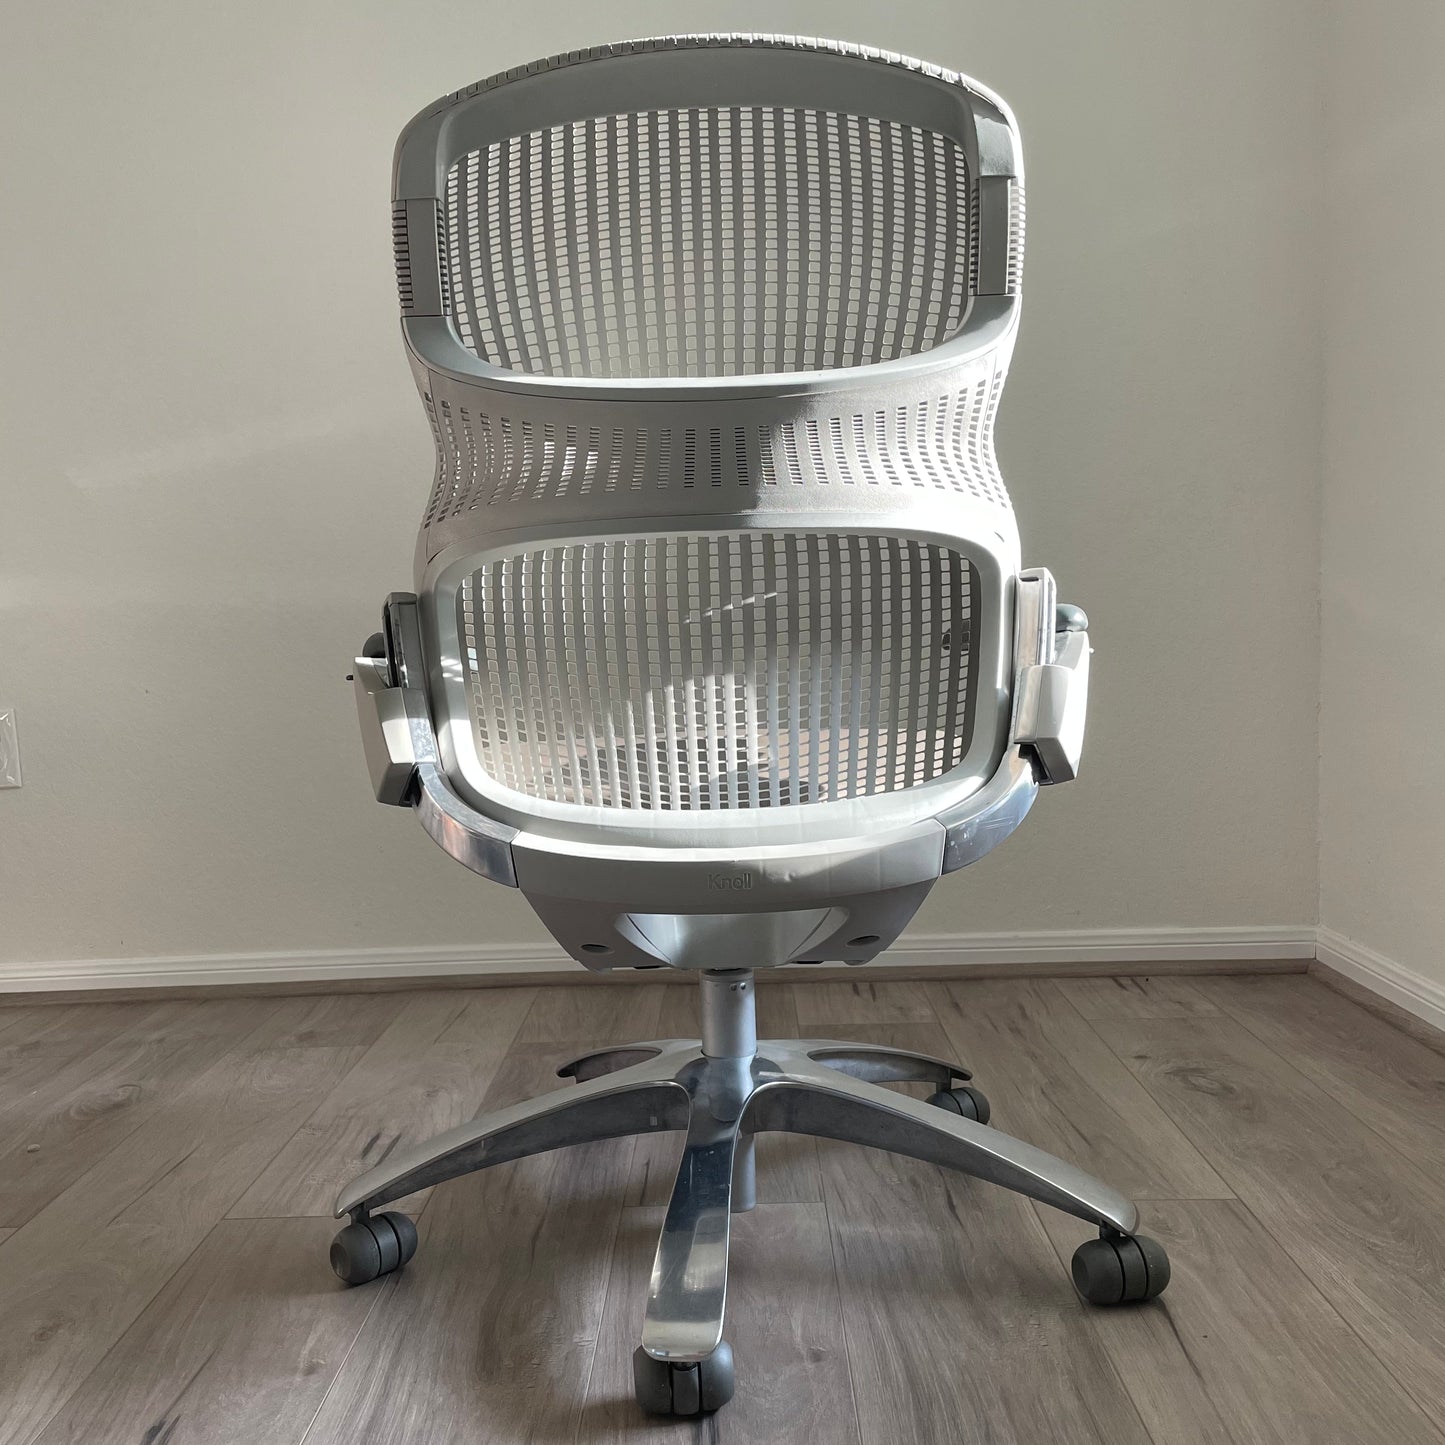 Light Knoll Generation Office Chair : See Shipping Rules